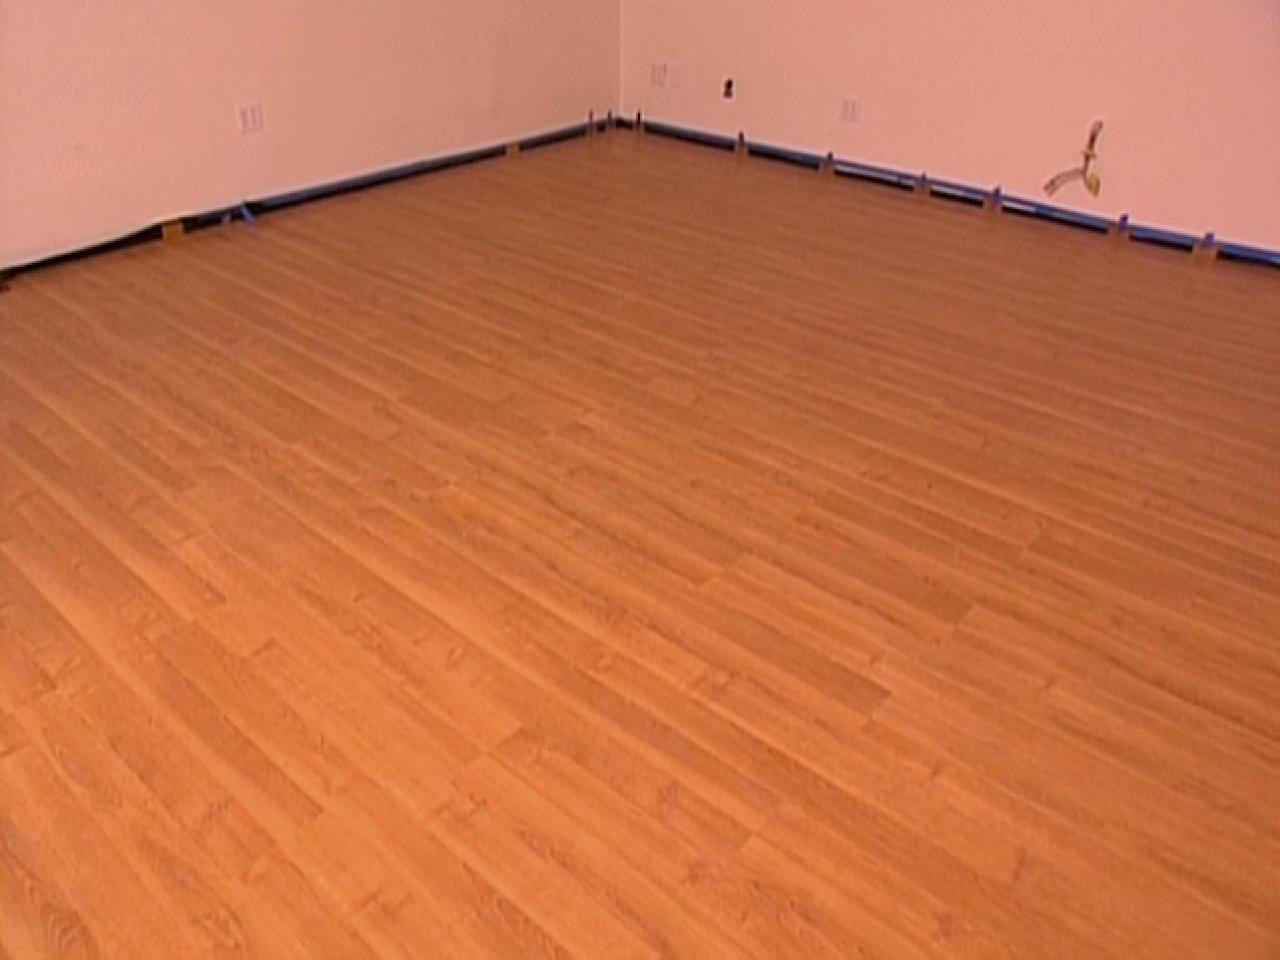 How to Install SnapTogether Laminate Flooring HGTV